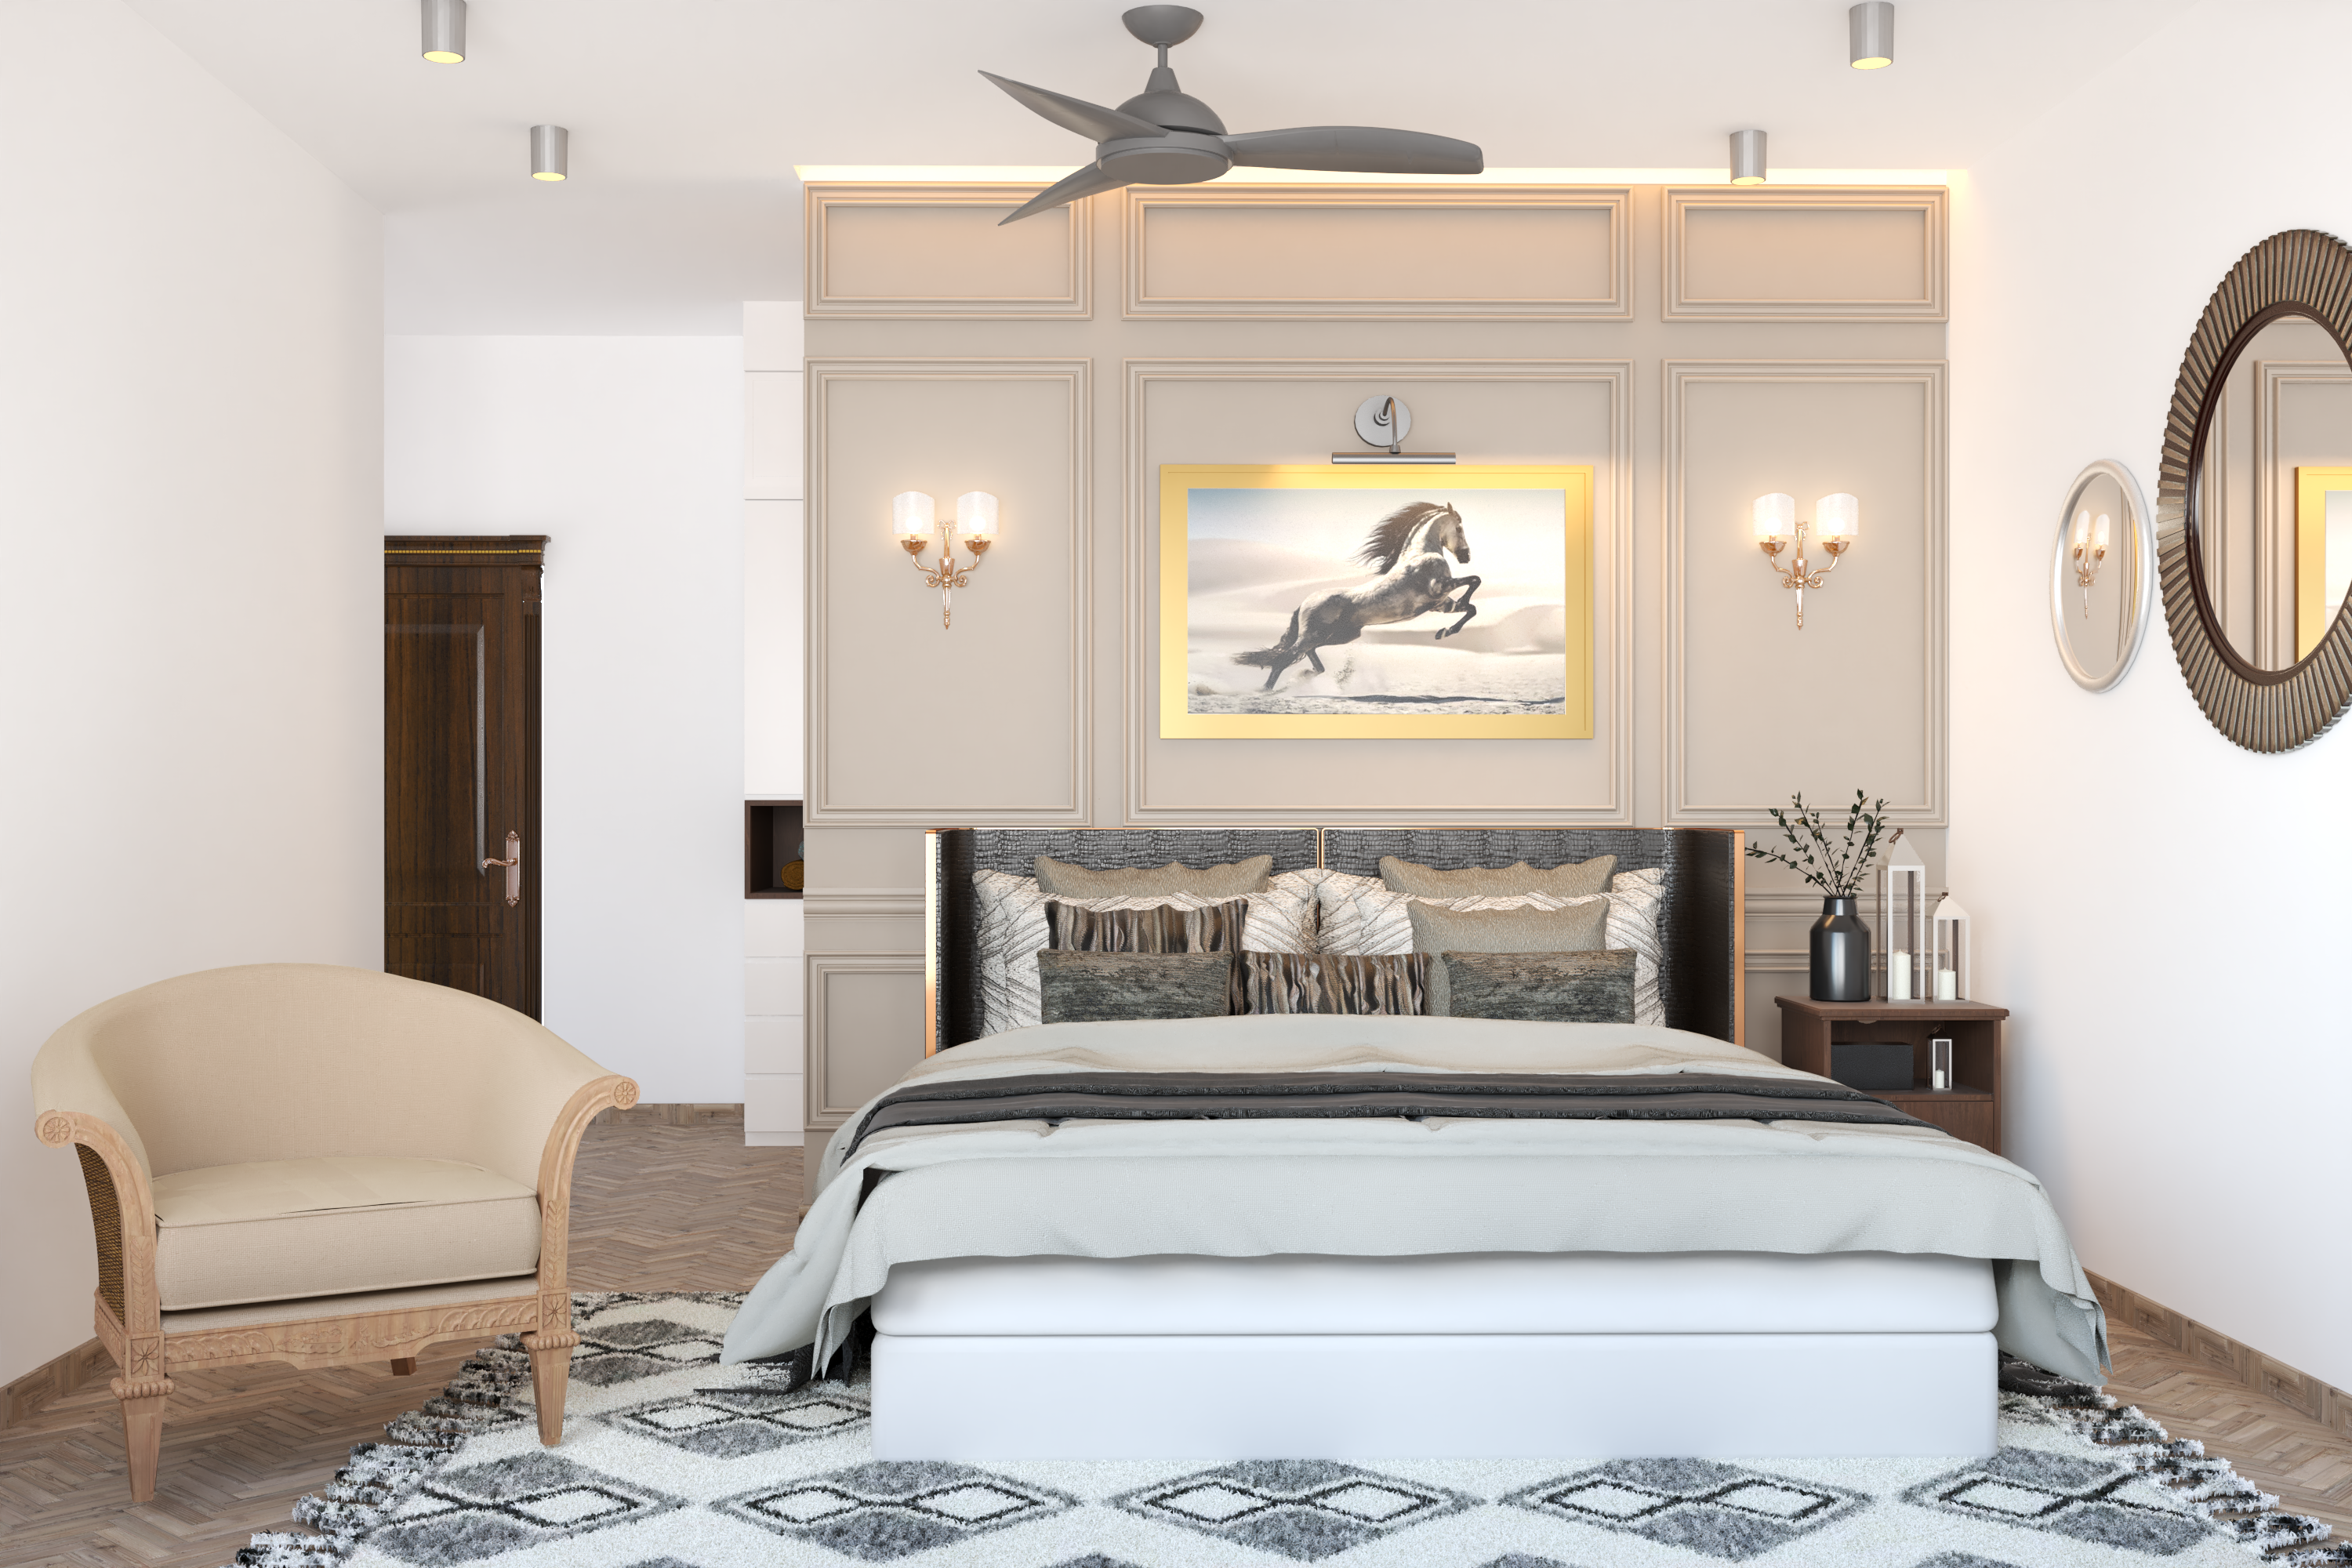 Traditional Master Bedroom Design With Spacious Interiors